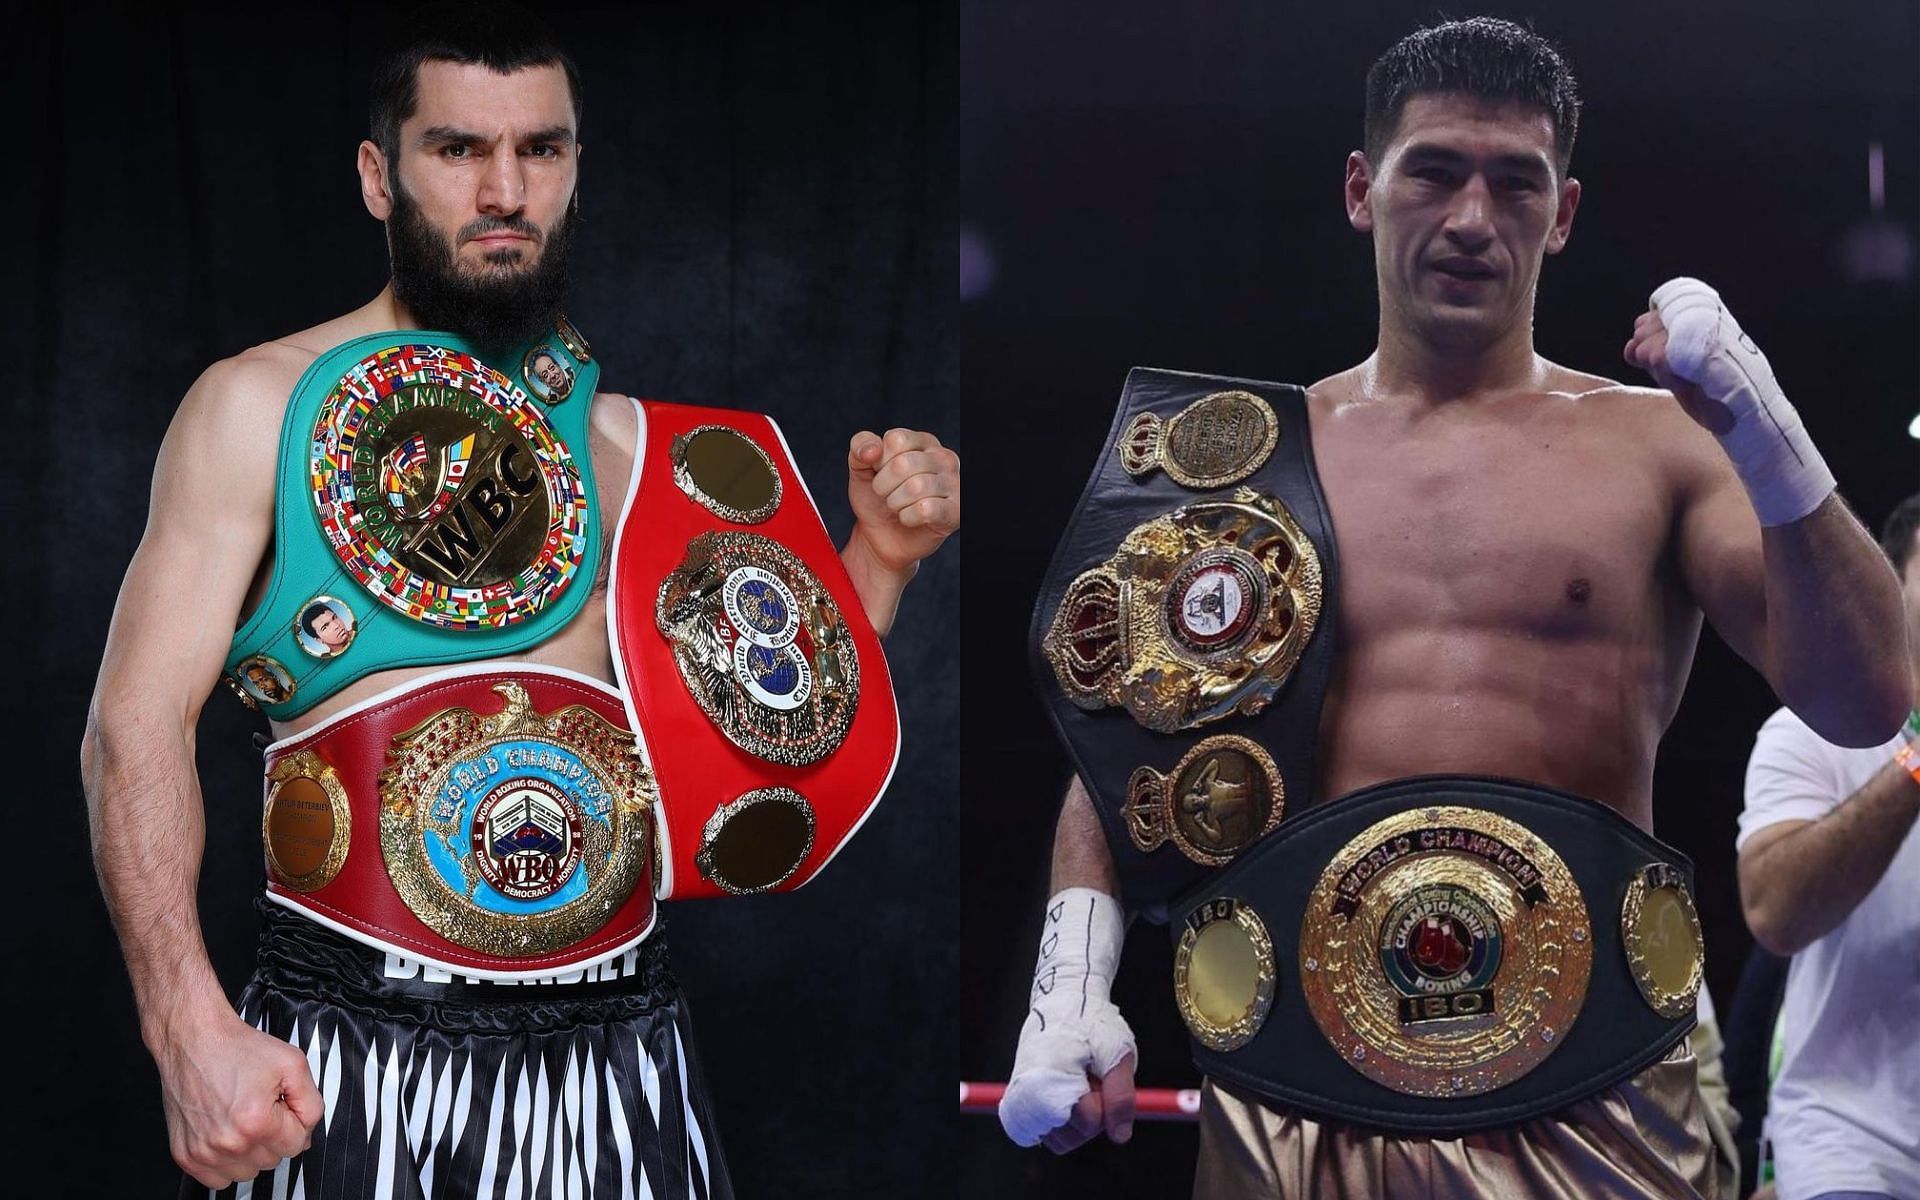 Artur Beterbiev (left) and Dmitry Bivol (right) are scheduled to square off in a huge match [Image via: @arturbeterbiev, @bivol_d on Instagram]